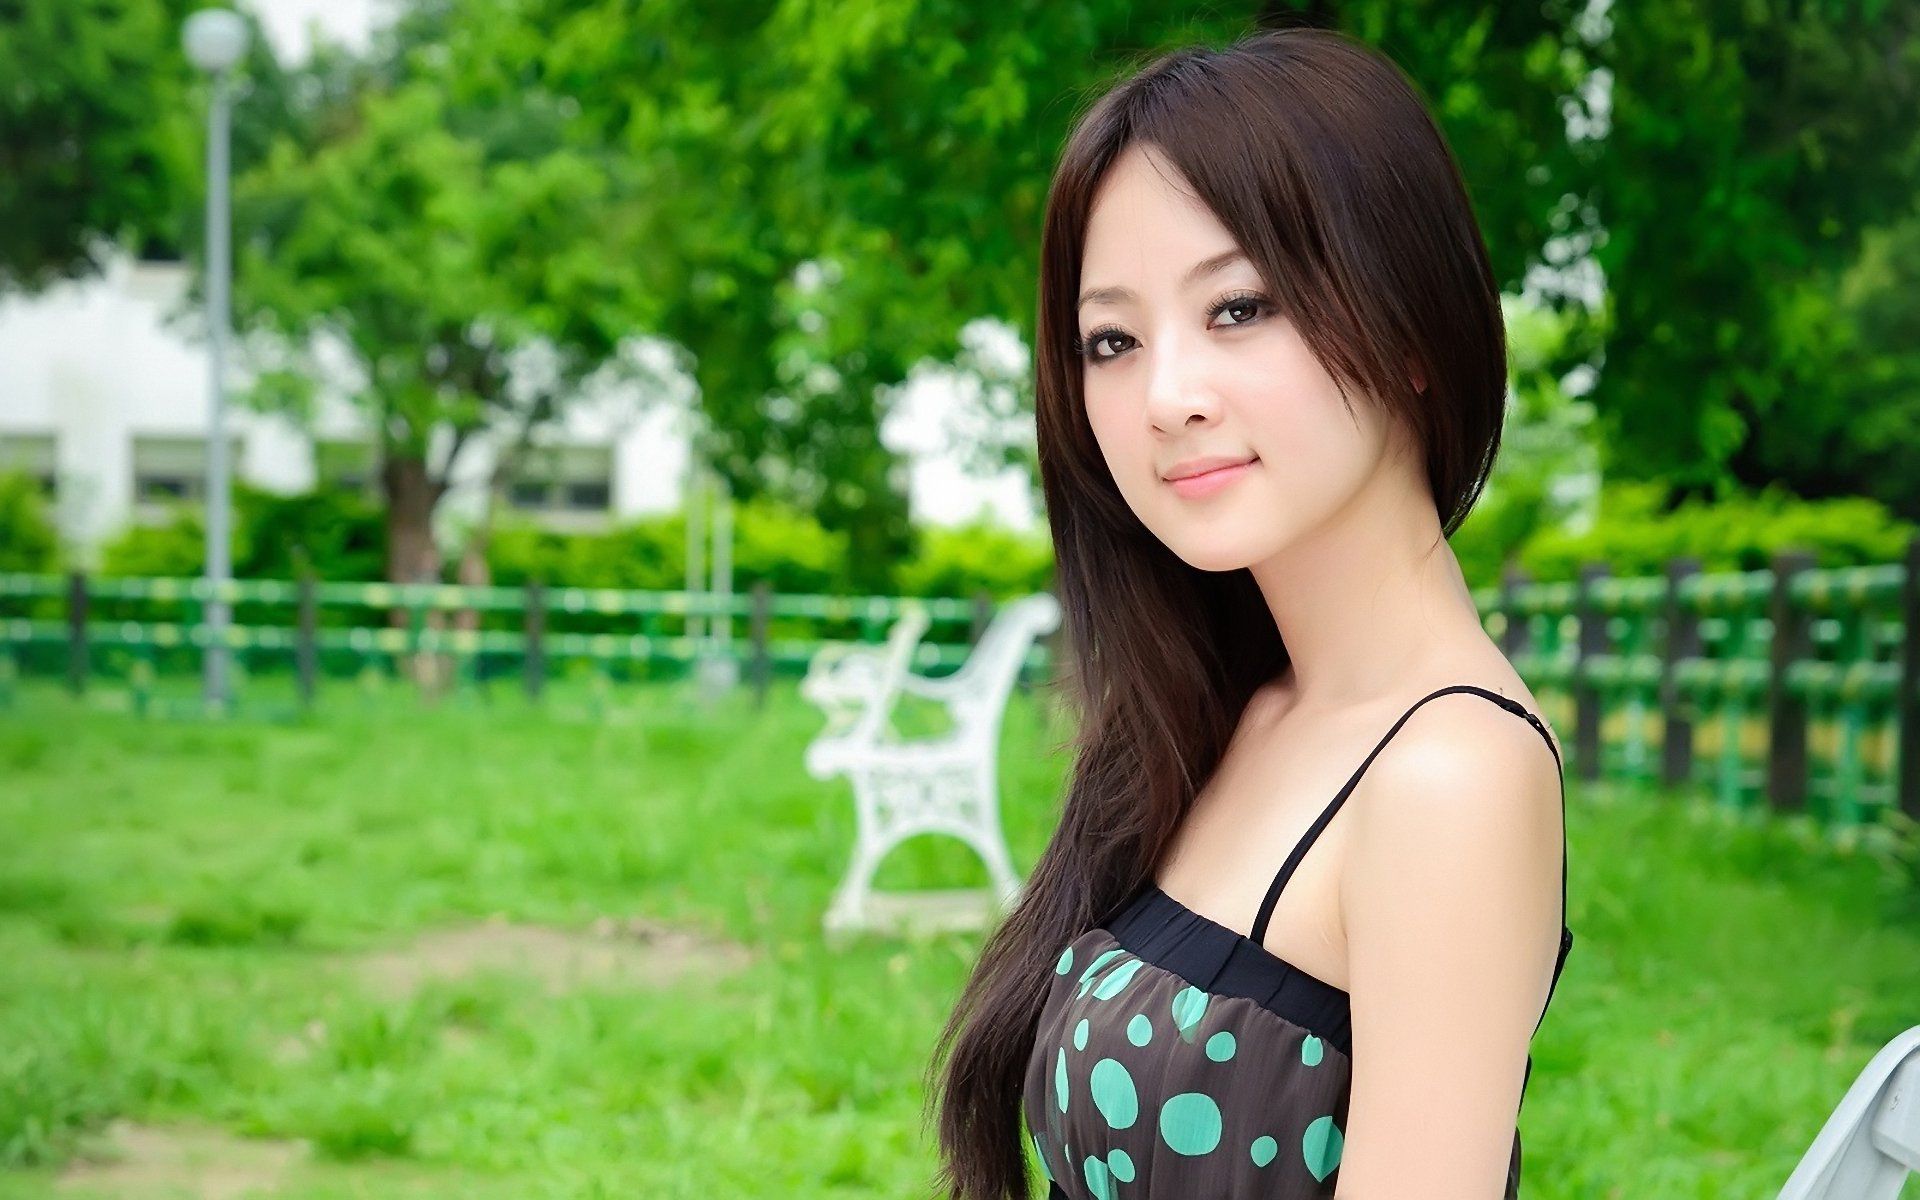 Free download Cute Japanese Girls Wallpapers Playboy Playmates My 1920x1200...